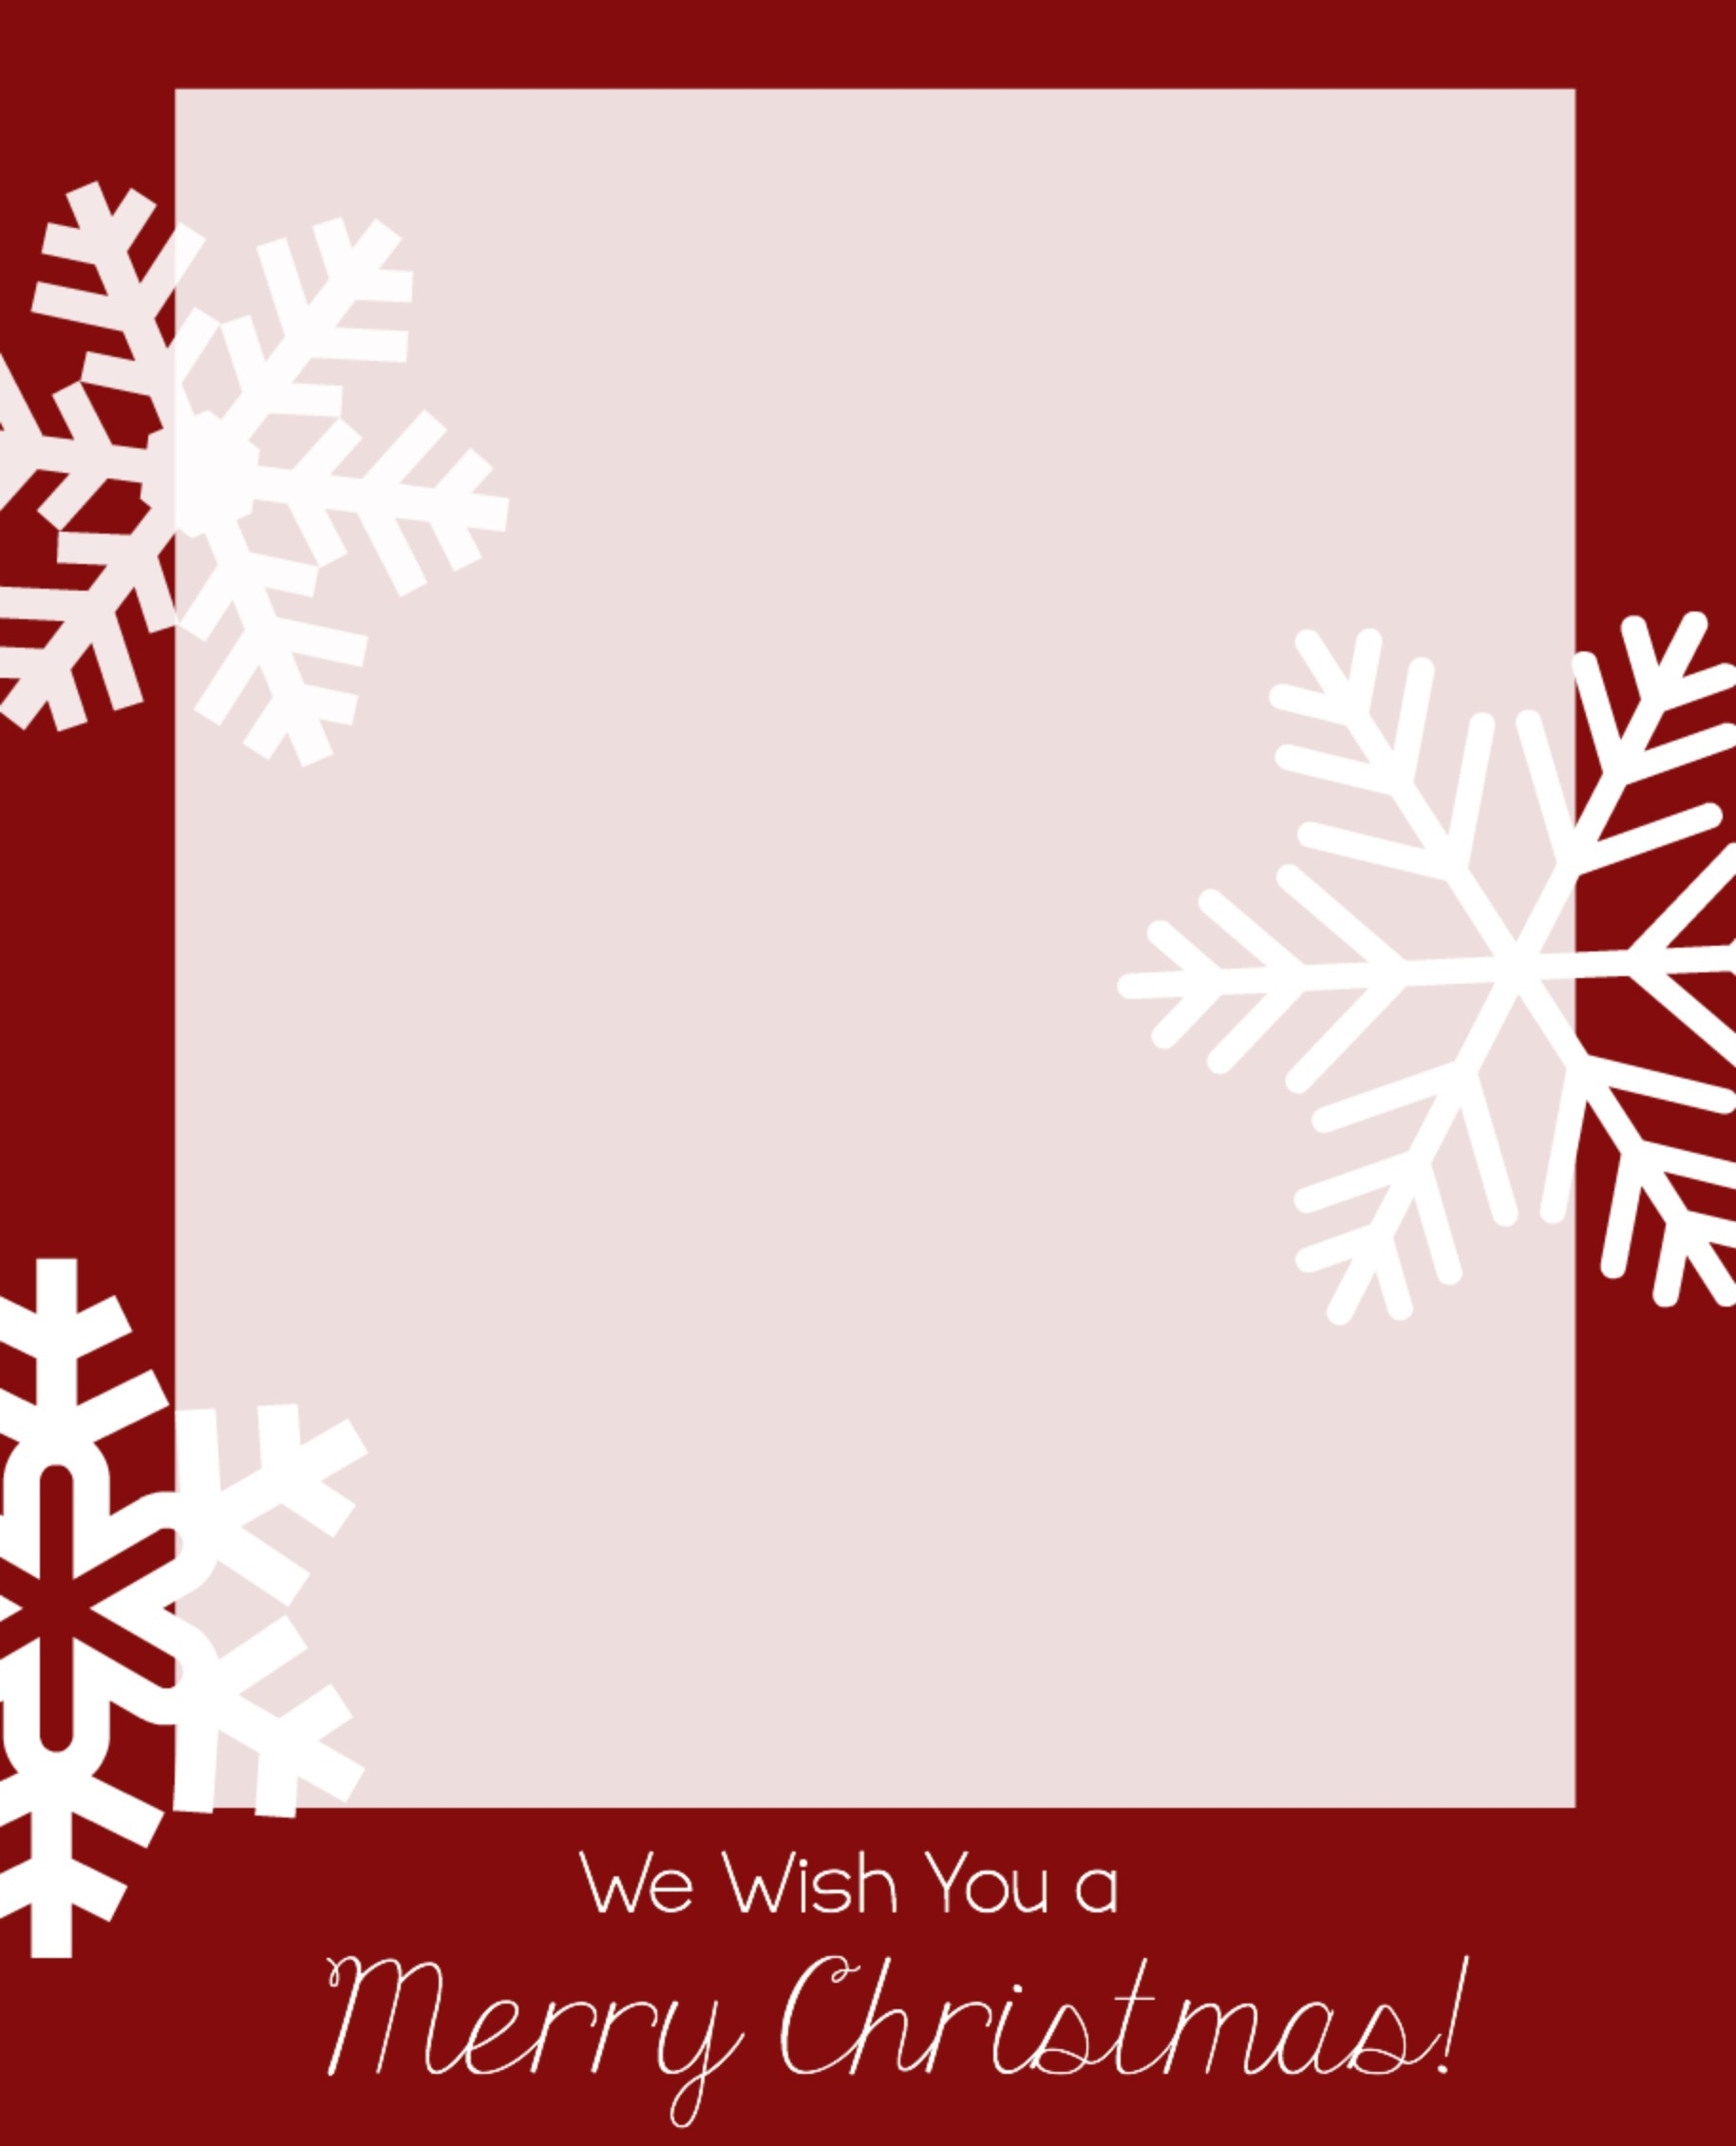 Free Christmas Card Templates – Crazy Little Projects With Happy Holidays Card Template